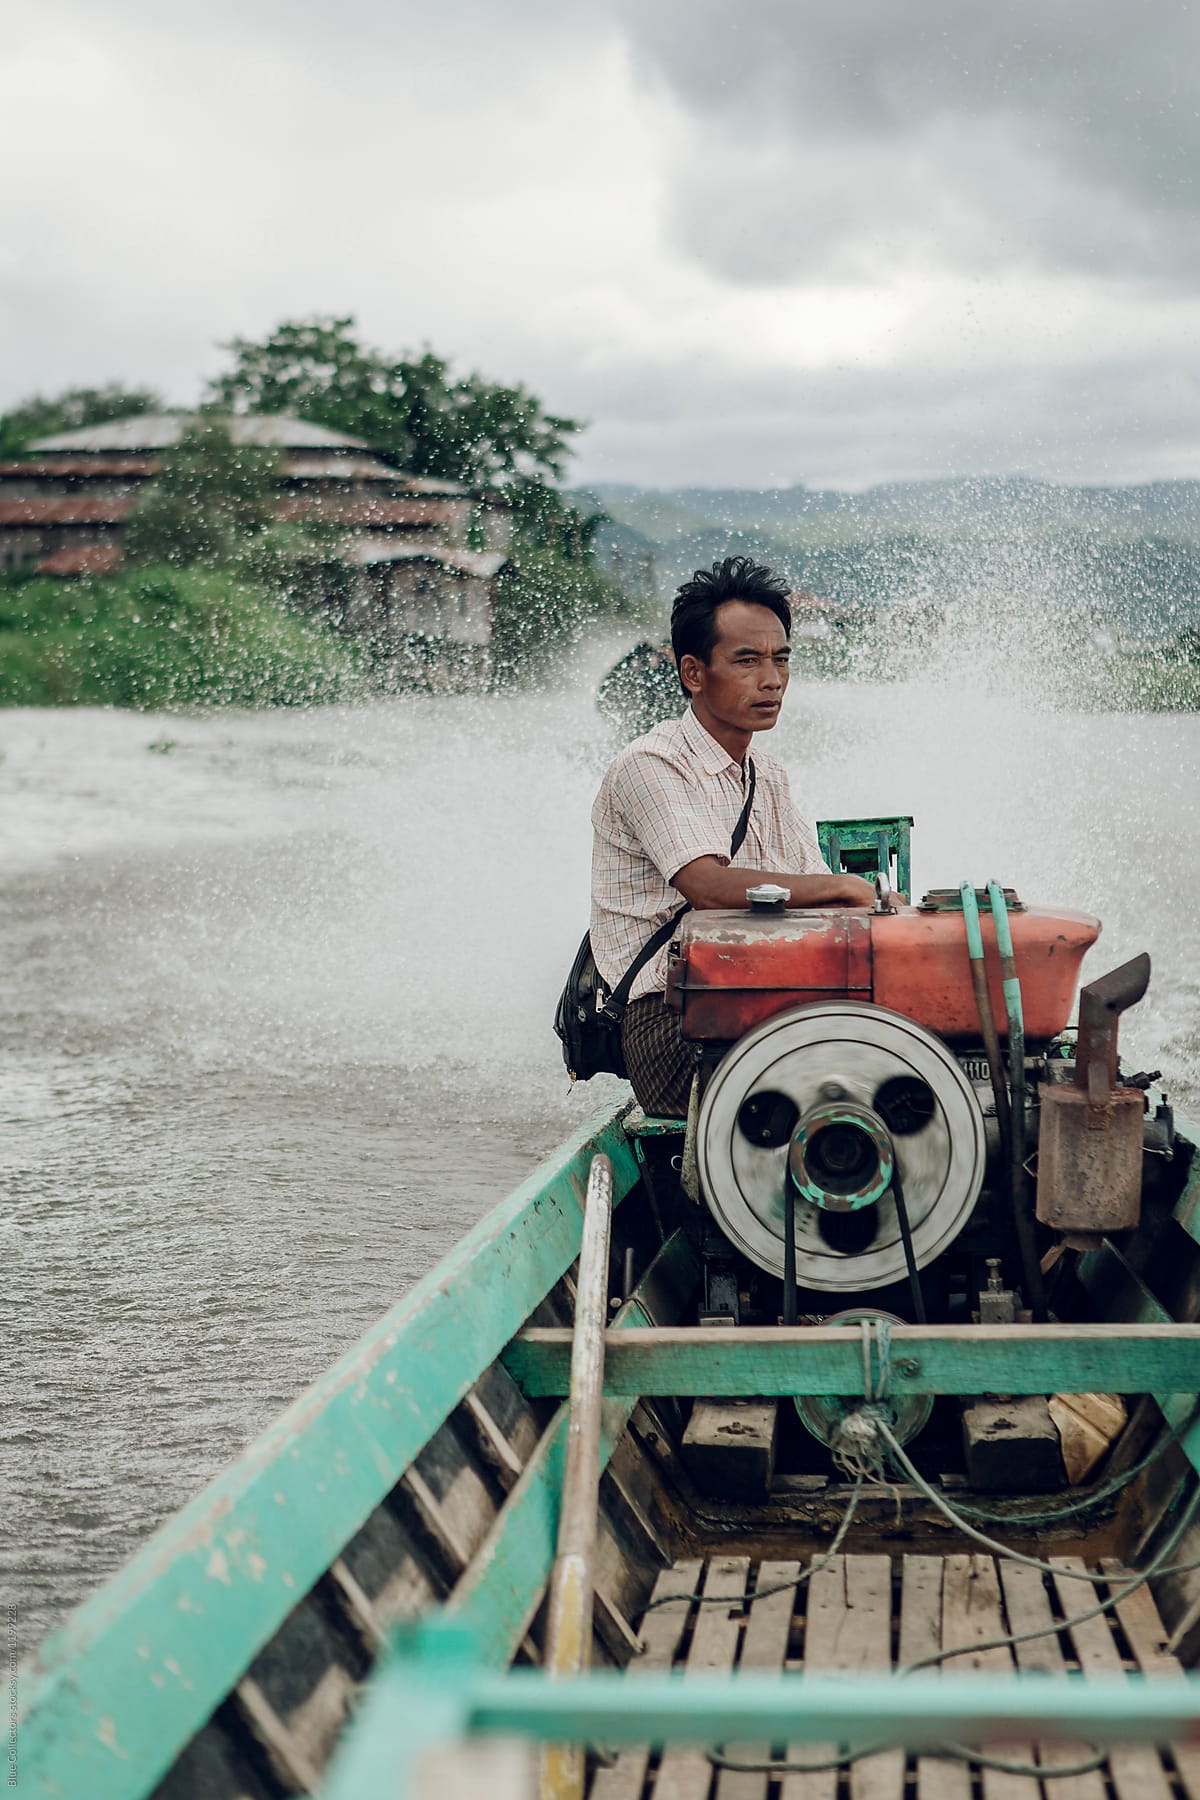 Asiatic handsome man seated and driving small motor boat with village in the background